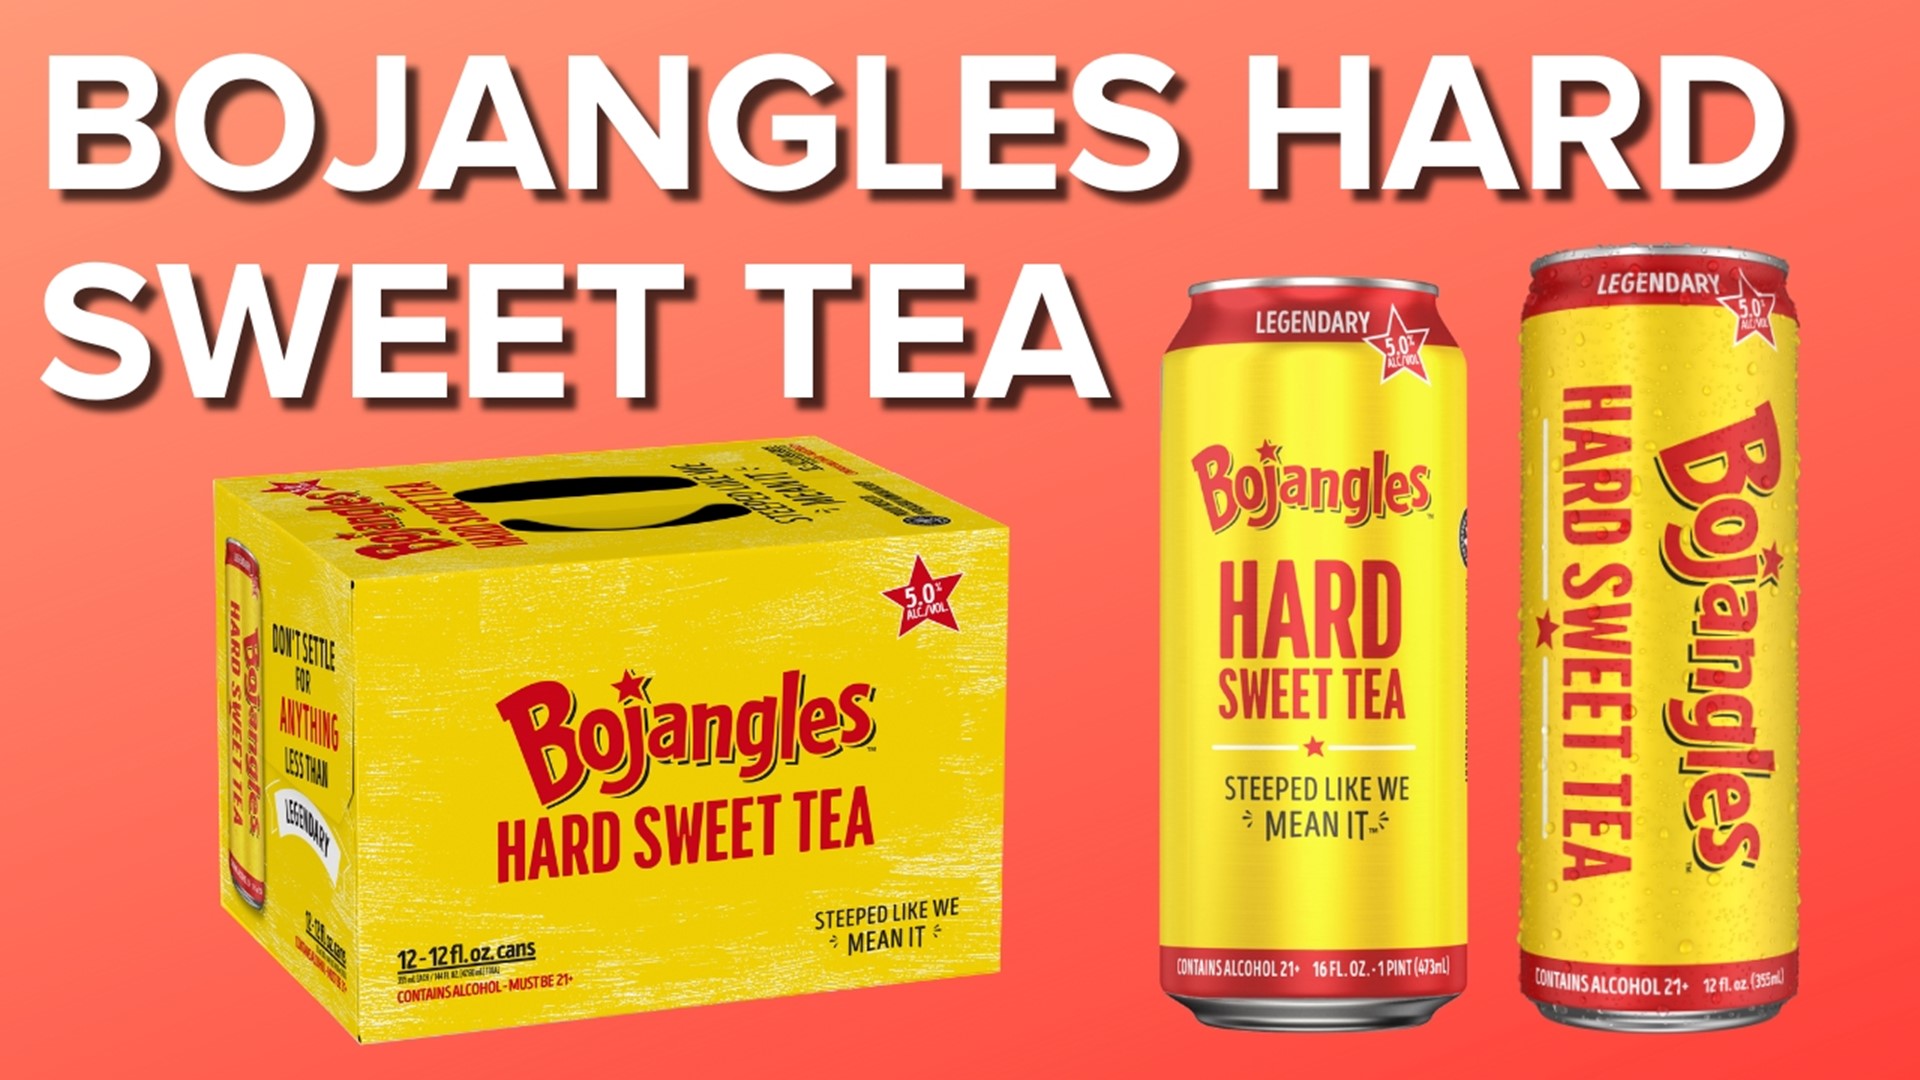 Bojangles and Appalachian Mountain Brewery collaborated to come up with Bojangles Hard Sweet Tea.